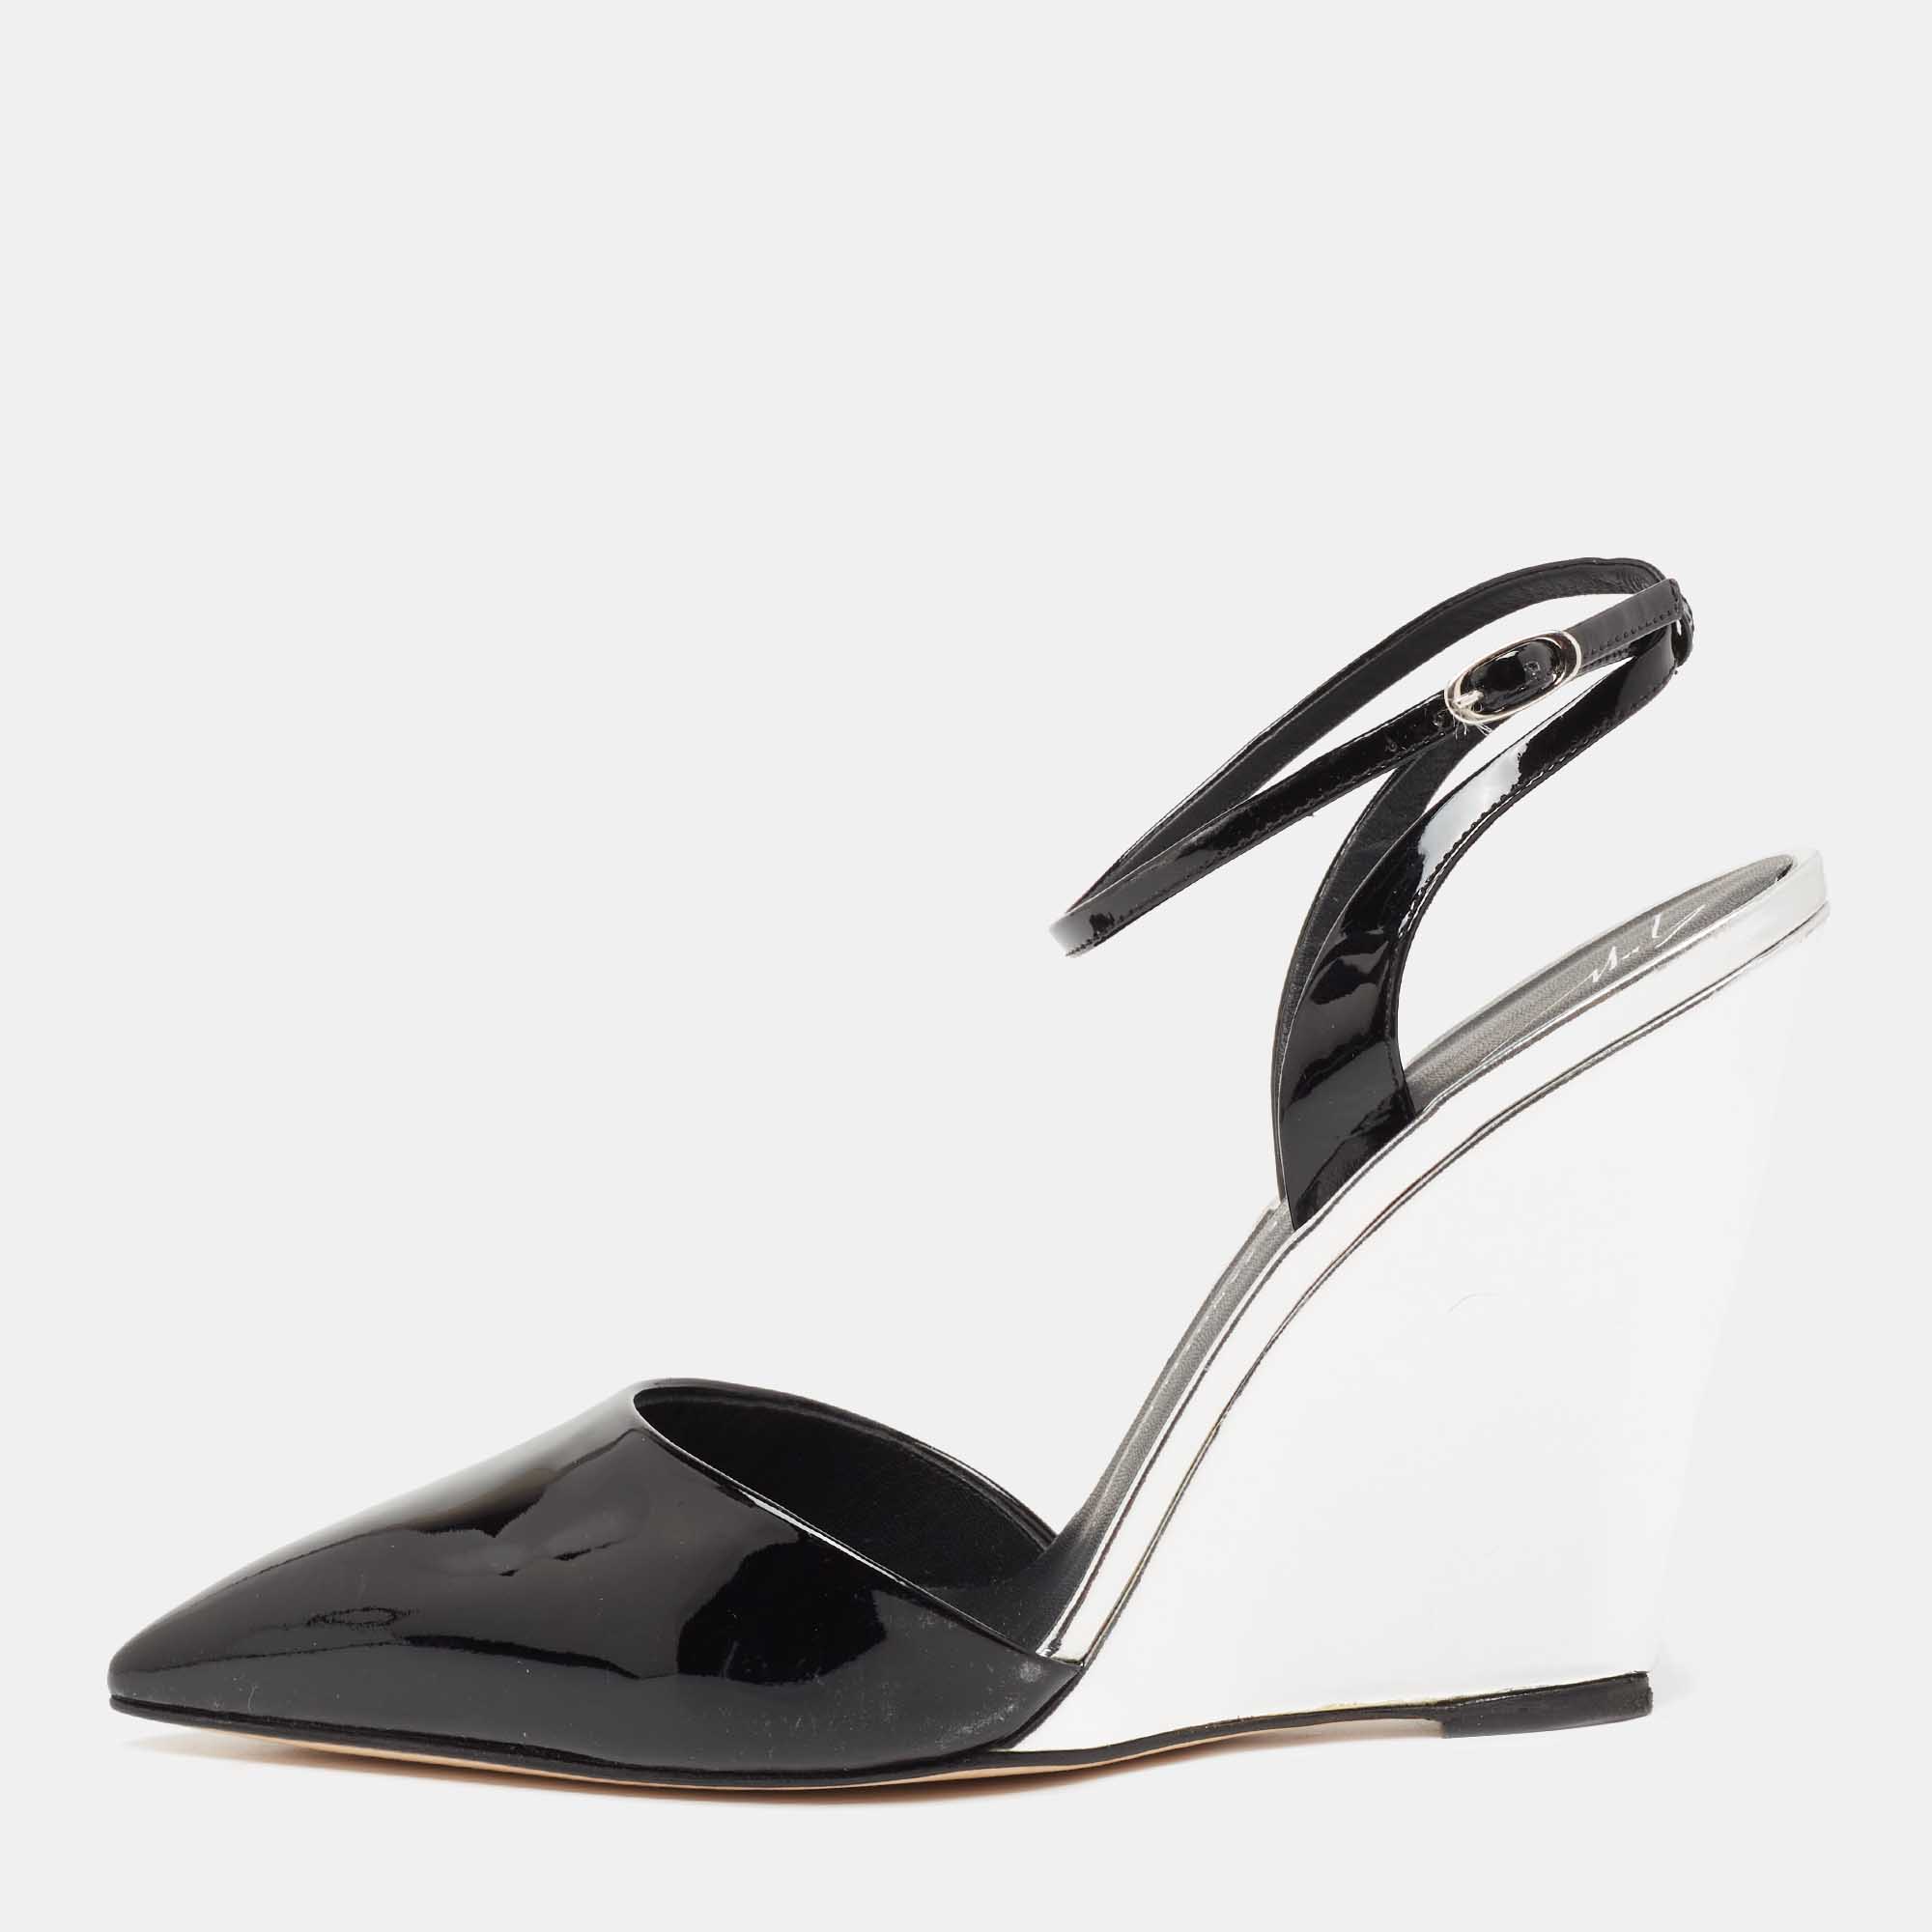 Giuseppe Zanotti yet again takes a simple silhouette and adds a chic touch to it These pumps have been crafted from patent leather in black and silver and are elevated by sleek pointed toes and 11 cm wedge heels.